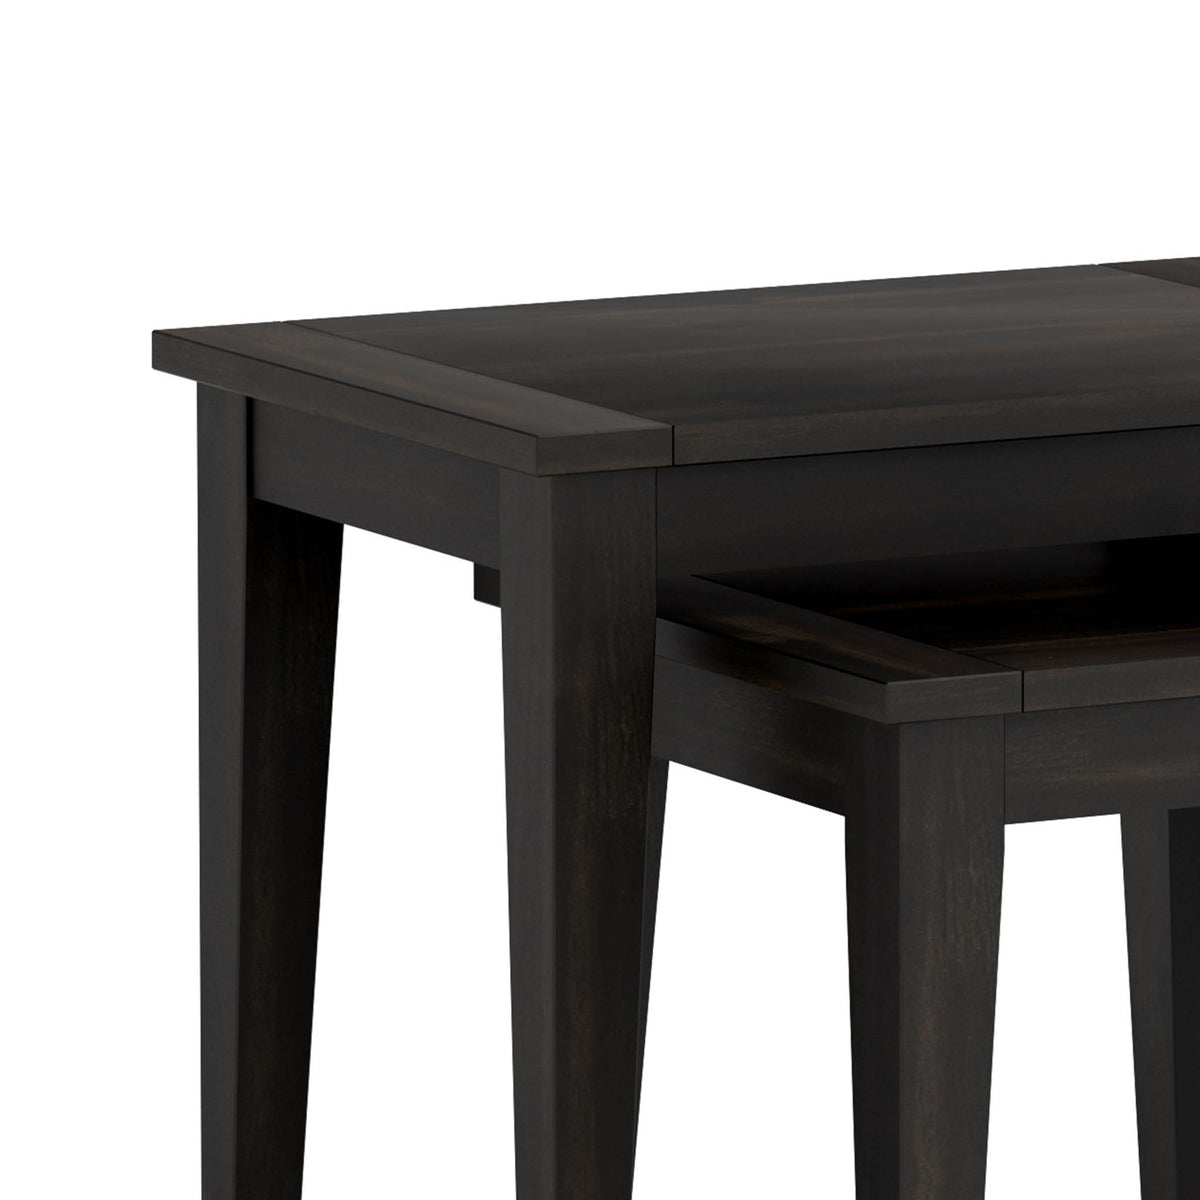 Elise Noir Black Acacia Nest of Tables Set close up of wooden table top